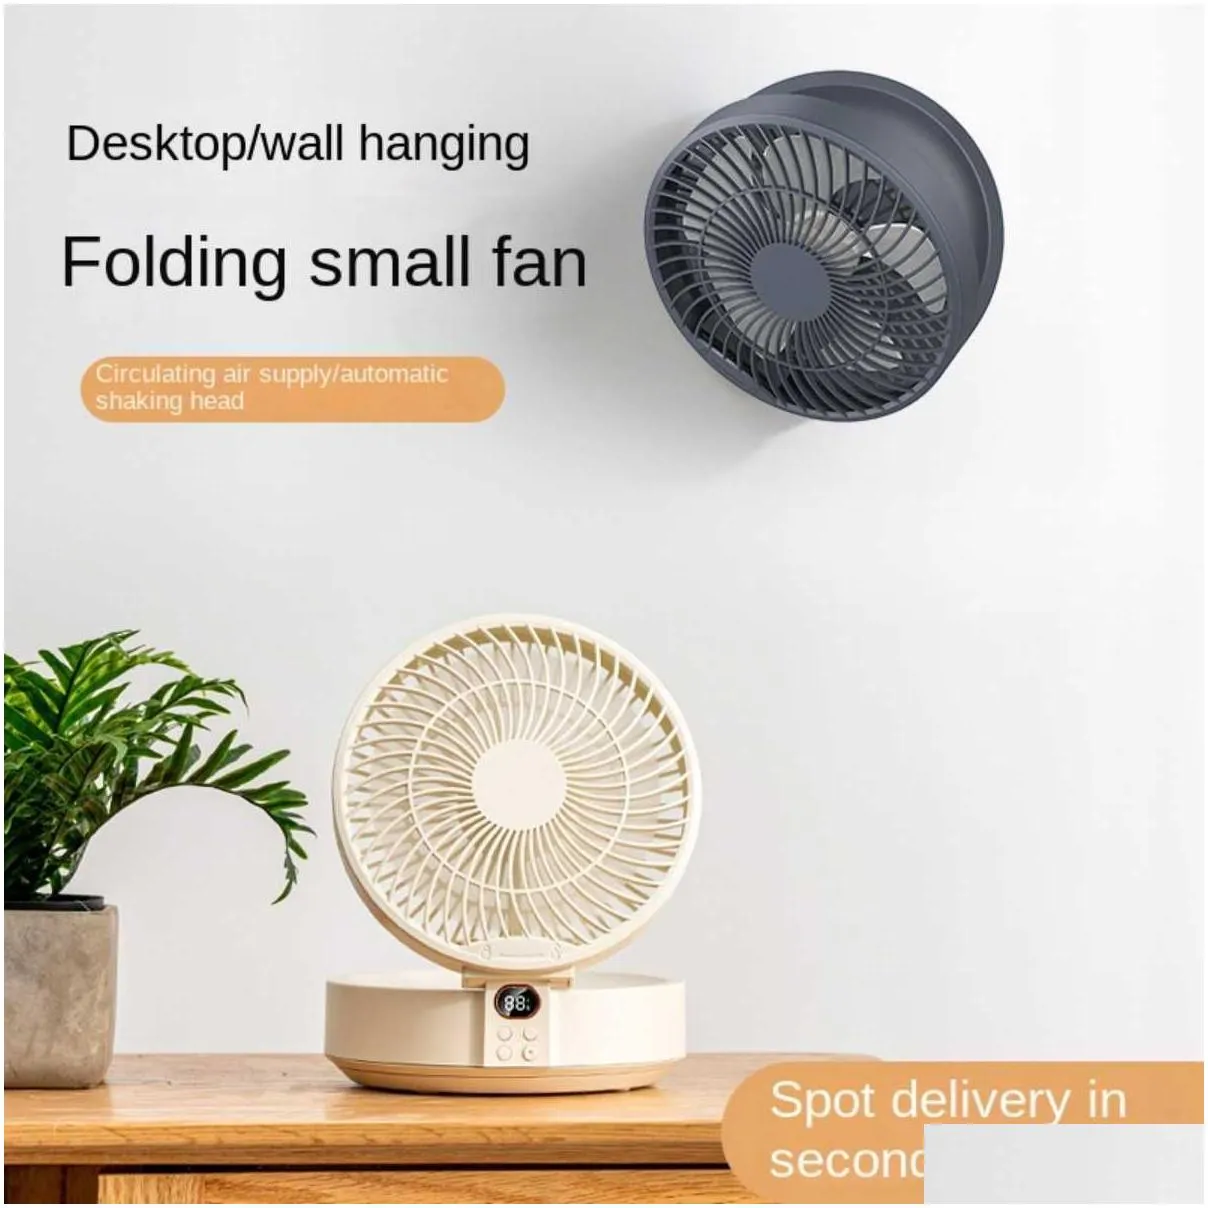 New Remote Control Wireless Punch-free Wall Mounted Circulation Air Cooling Fan with LED Light Desktop Folding Electric Table Fan